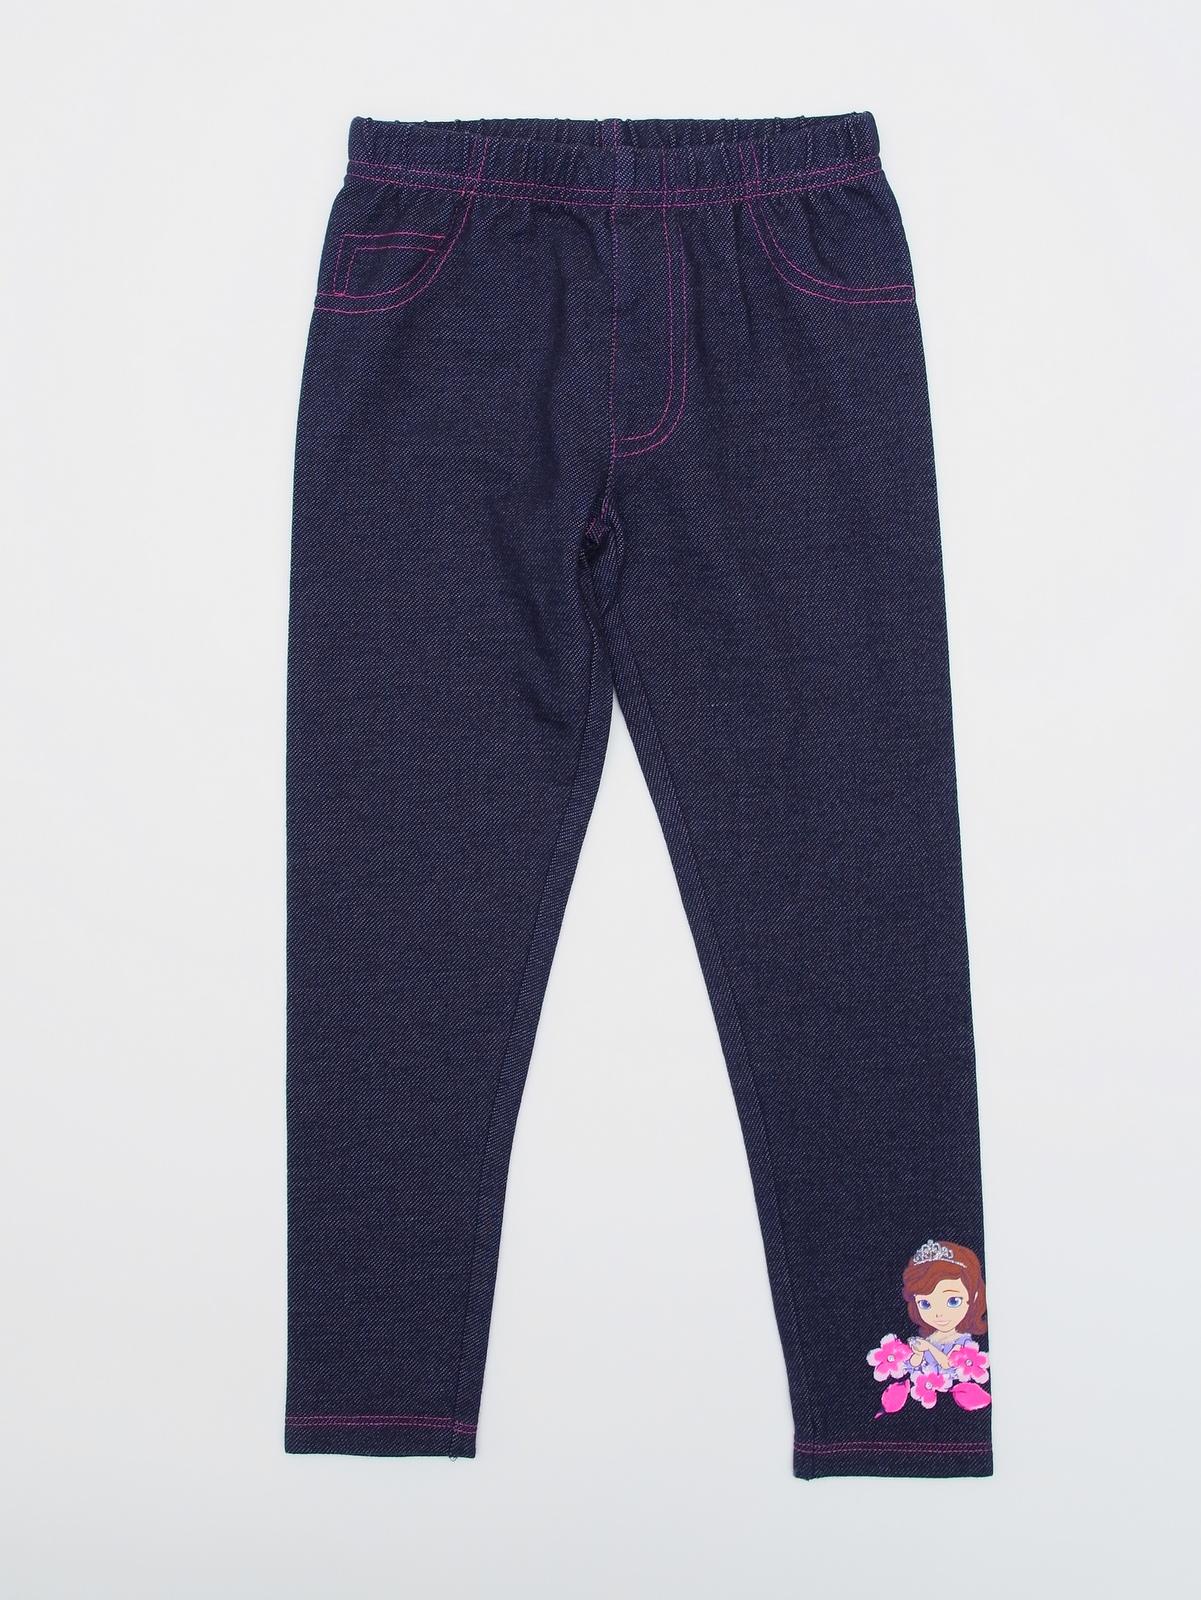 Disney Sofia the First Girl's Jeggings